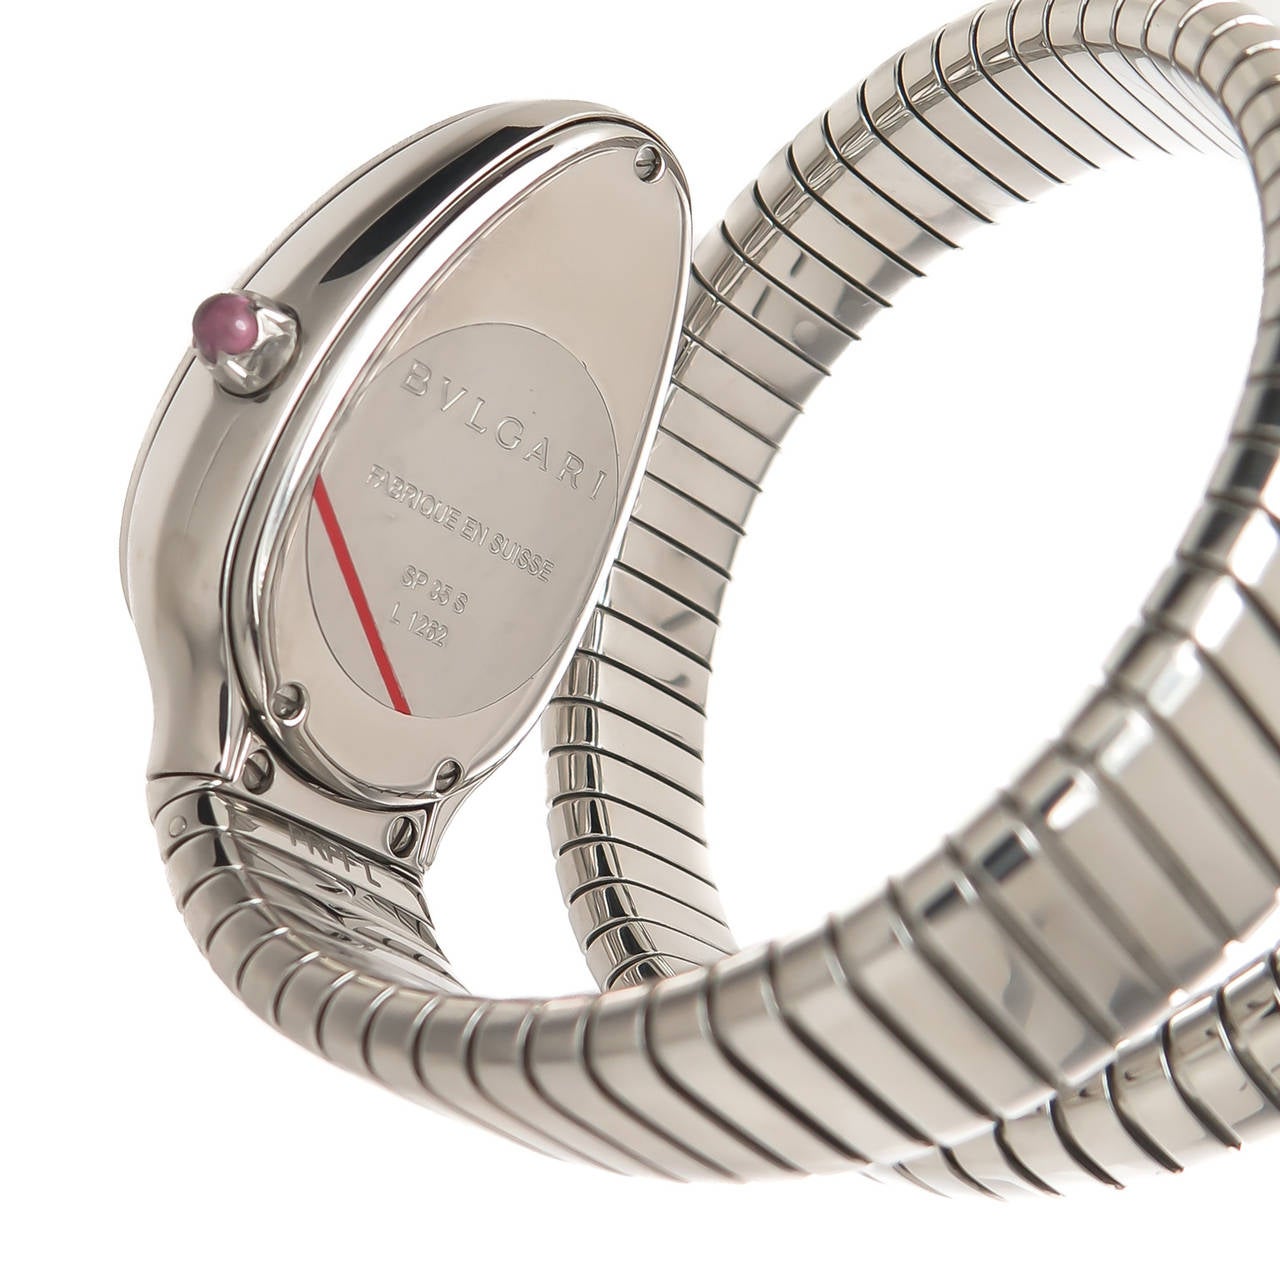 Circa 2014 Bulgari Serpenti collection Wrist Watch. Stainless Steel Tubogas flexible Bracelet. watch measures 35 MM and is 9 MM thick. Quartz movement, silver sunburst dial with raised Steel markers. Scratch resistant sapphire crystal and Pink